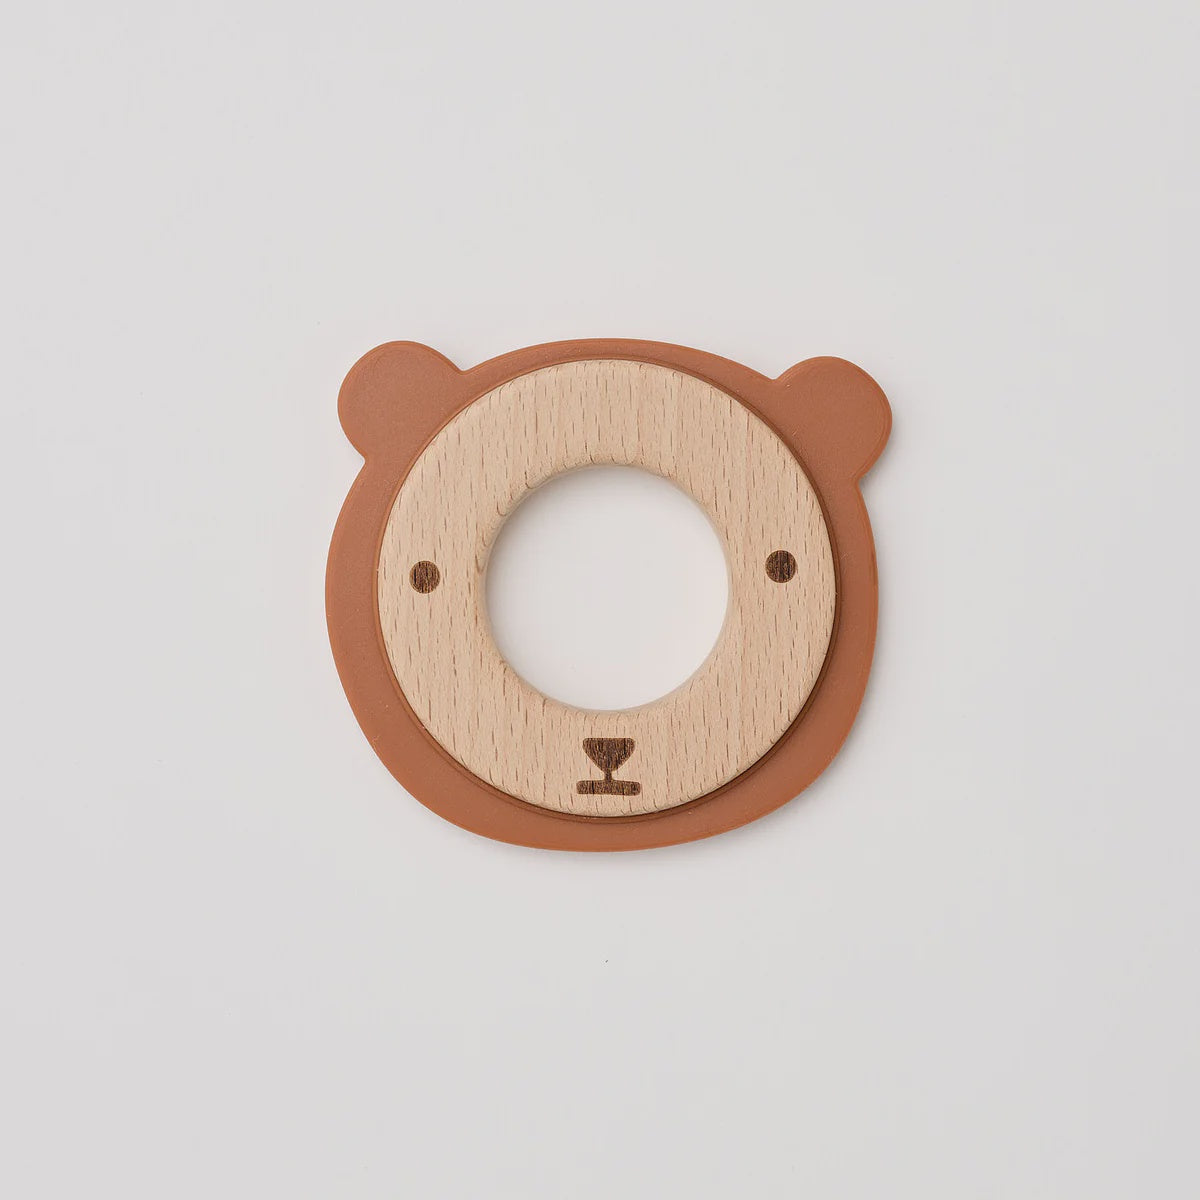 Over the Dandelions Bear Teether Wood/Silicone